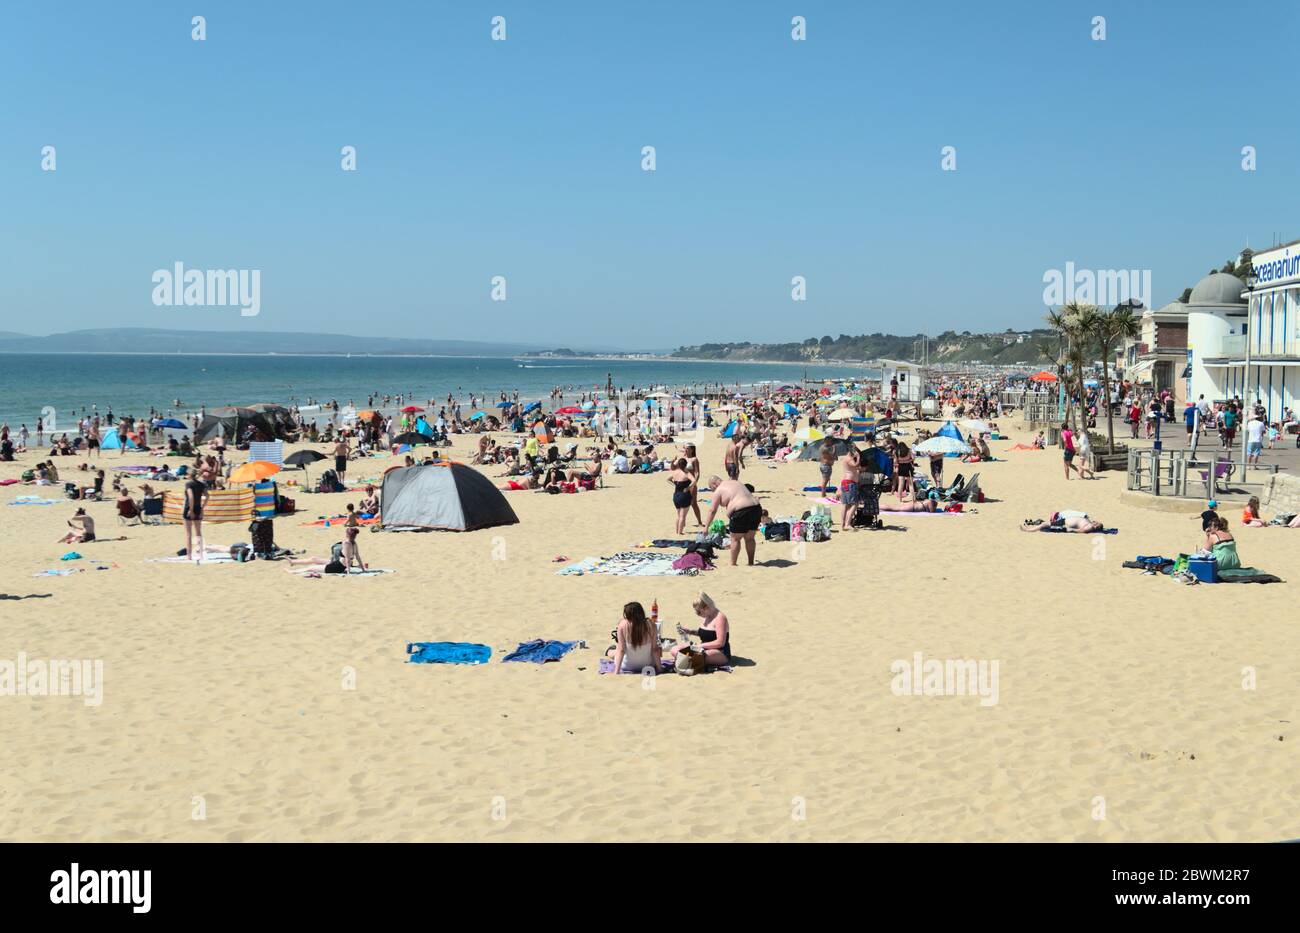 Bournemouth, Dorset / UK - May 30 2020: Sunbathers flock to Bournemouth beach as lockdown restrictions are eased. Stock Photo